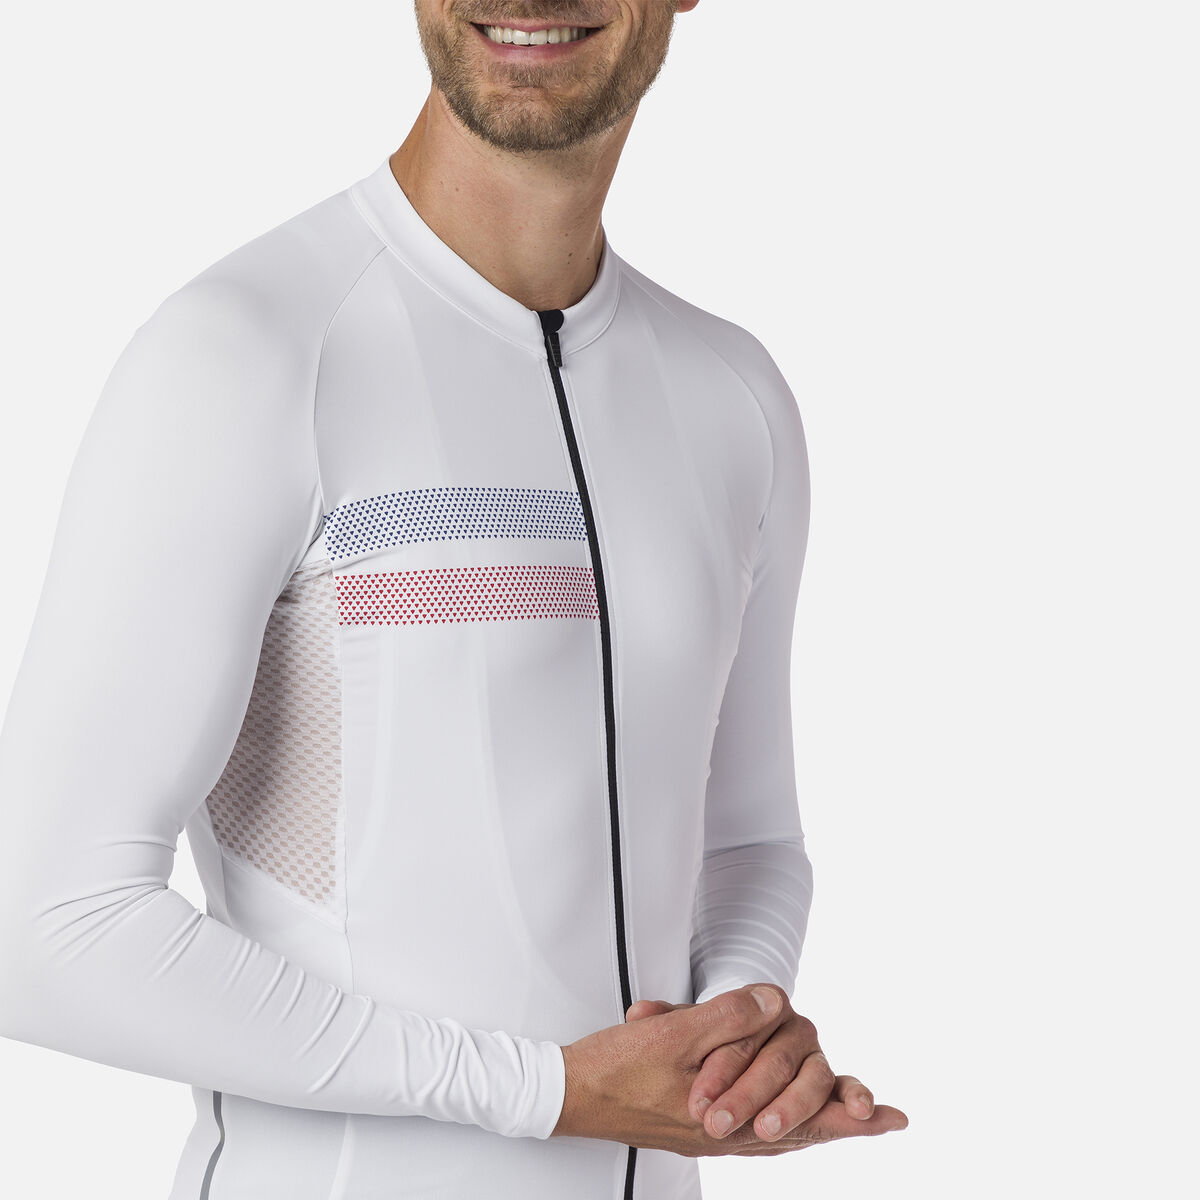 Rossignol Men's Cycling Jersey white